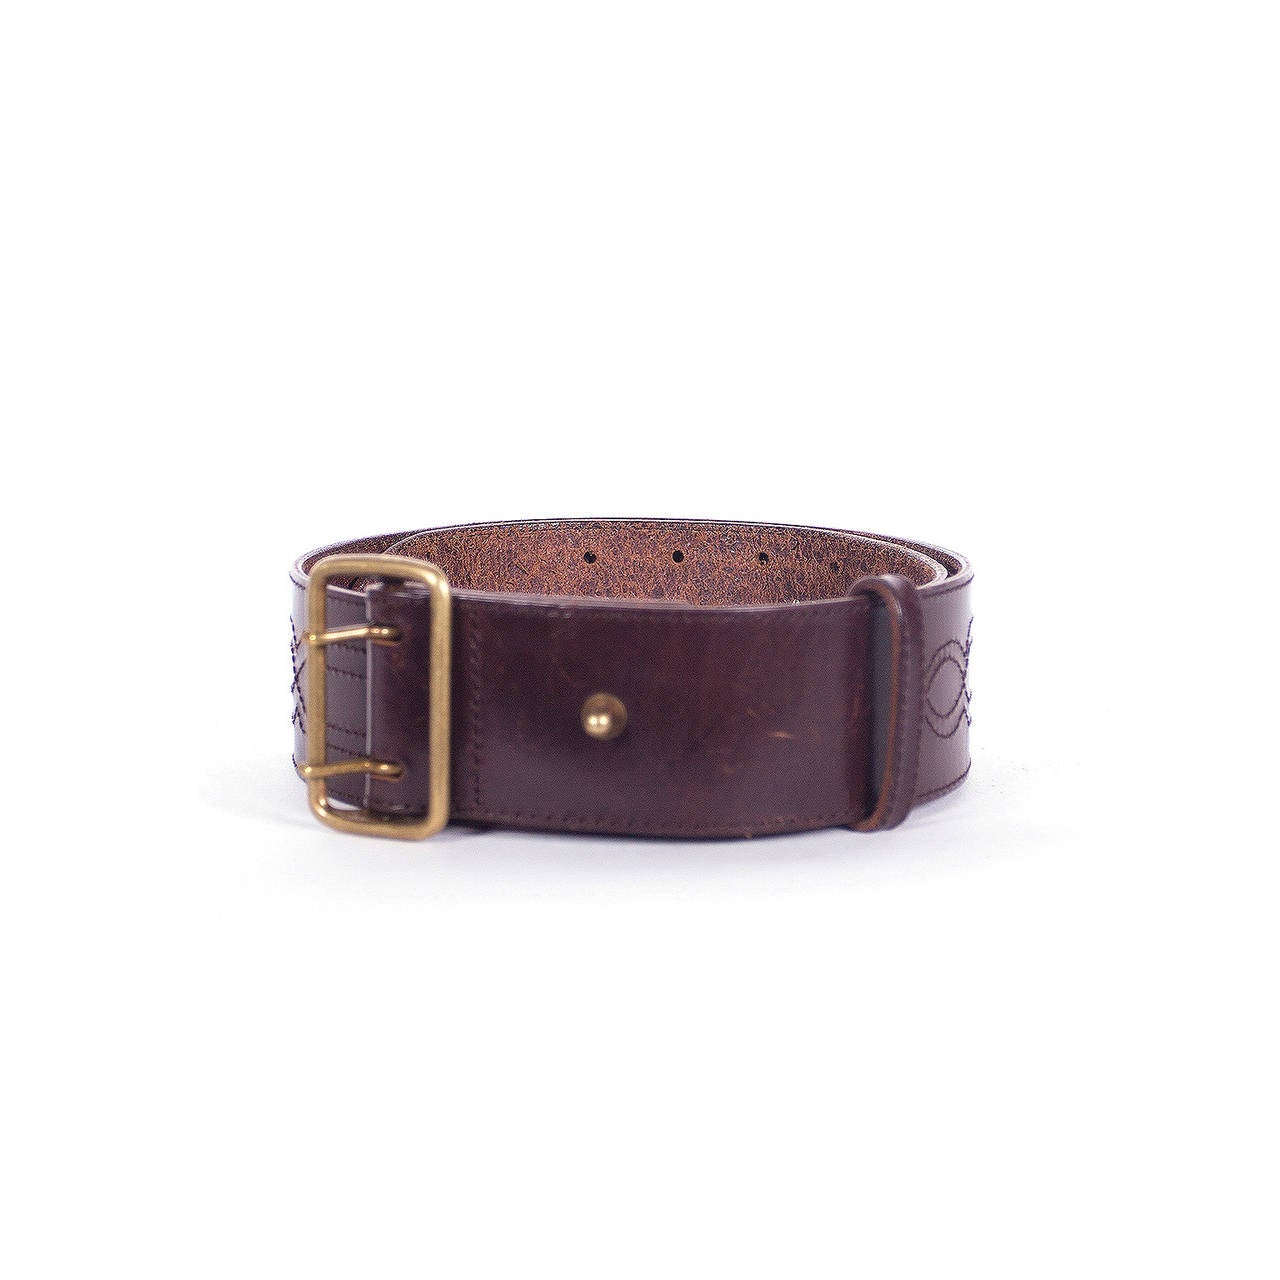 Azzedine Alaia Paris seamed leather belt. Belt is a chocolate brown matte leather, topstitched raised seams from front to back, criss crossing to give triangular effect. Belt has brushed gold double buckle with one hook and belt loop closure. Belt